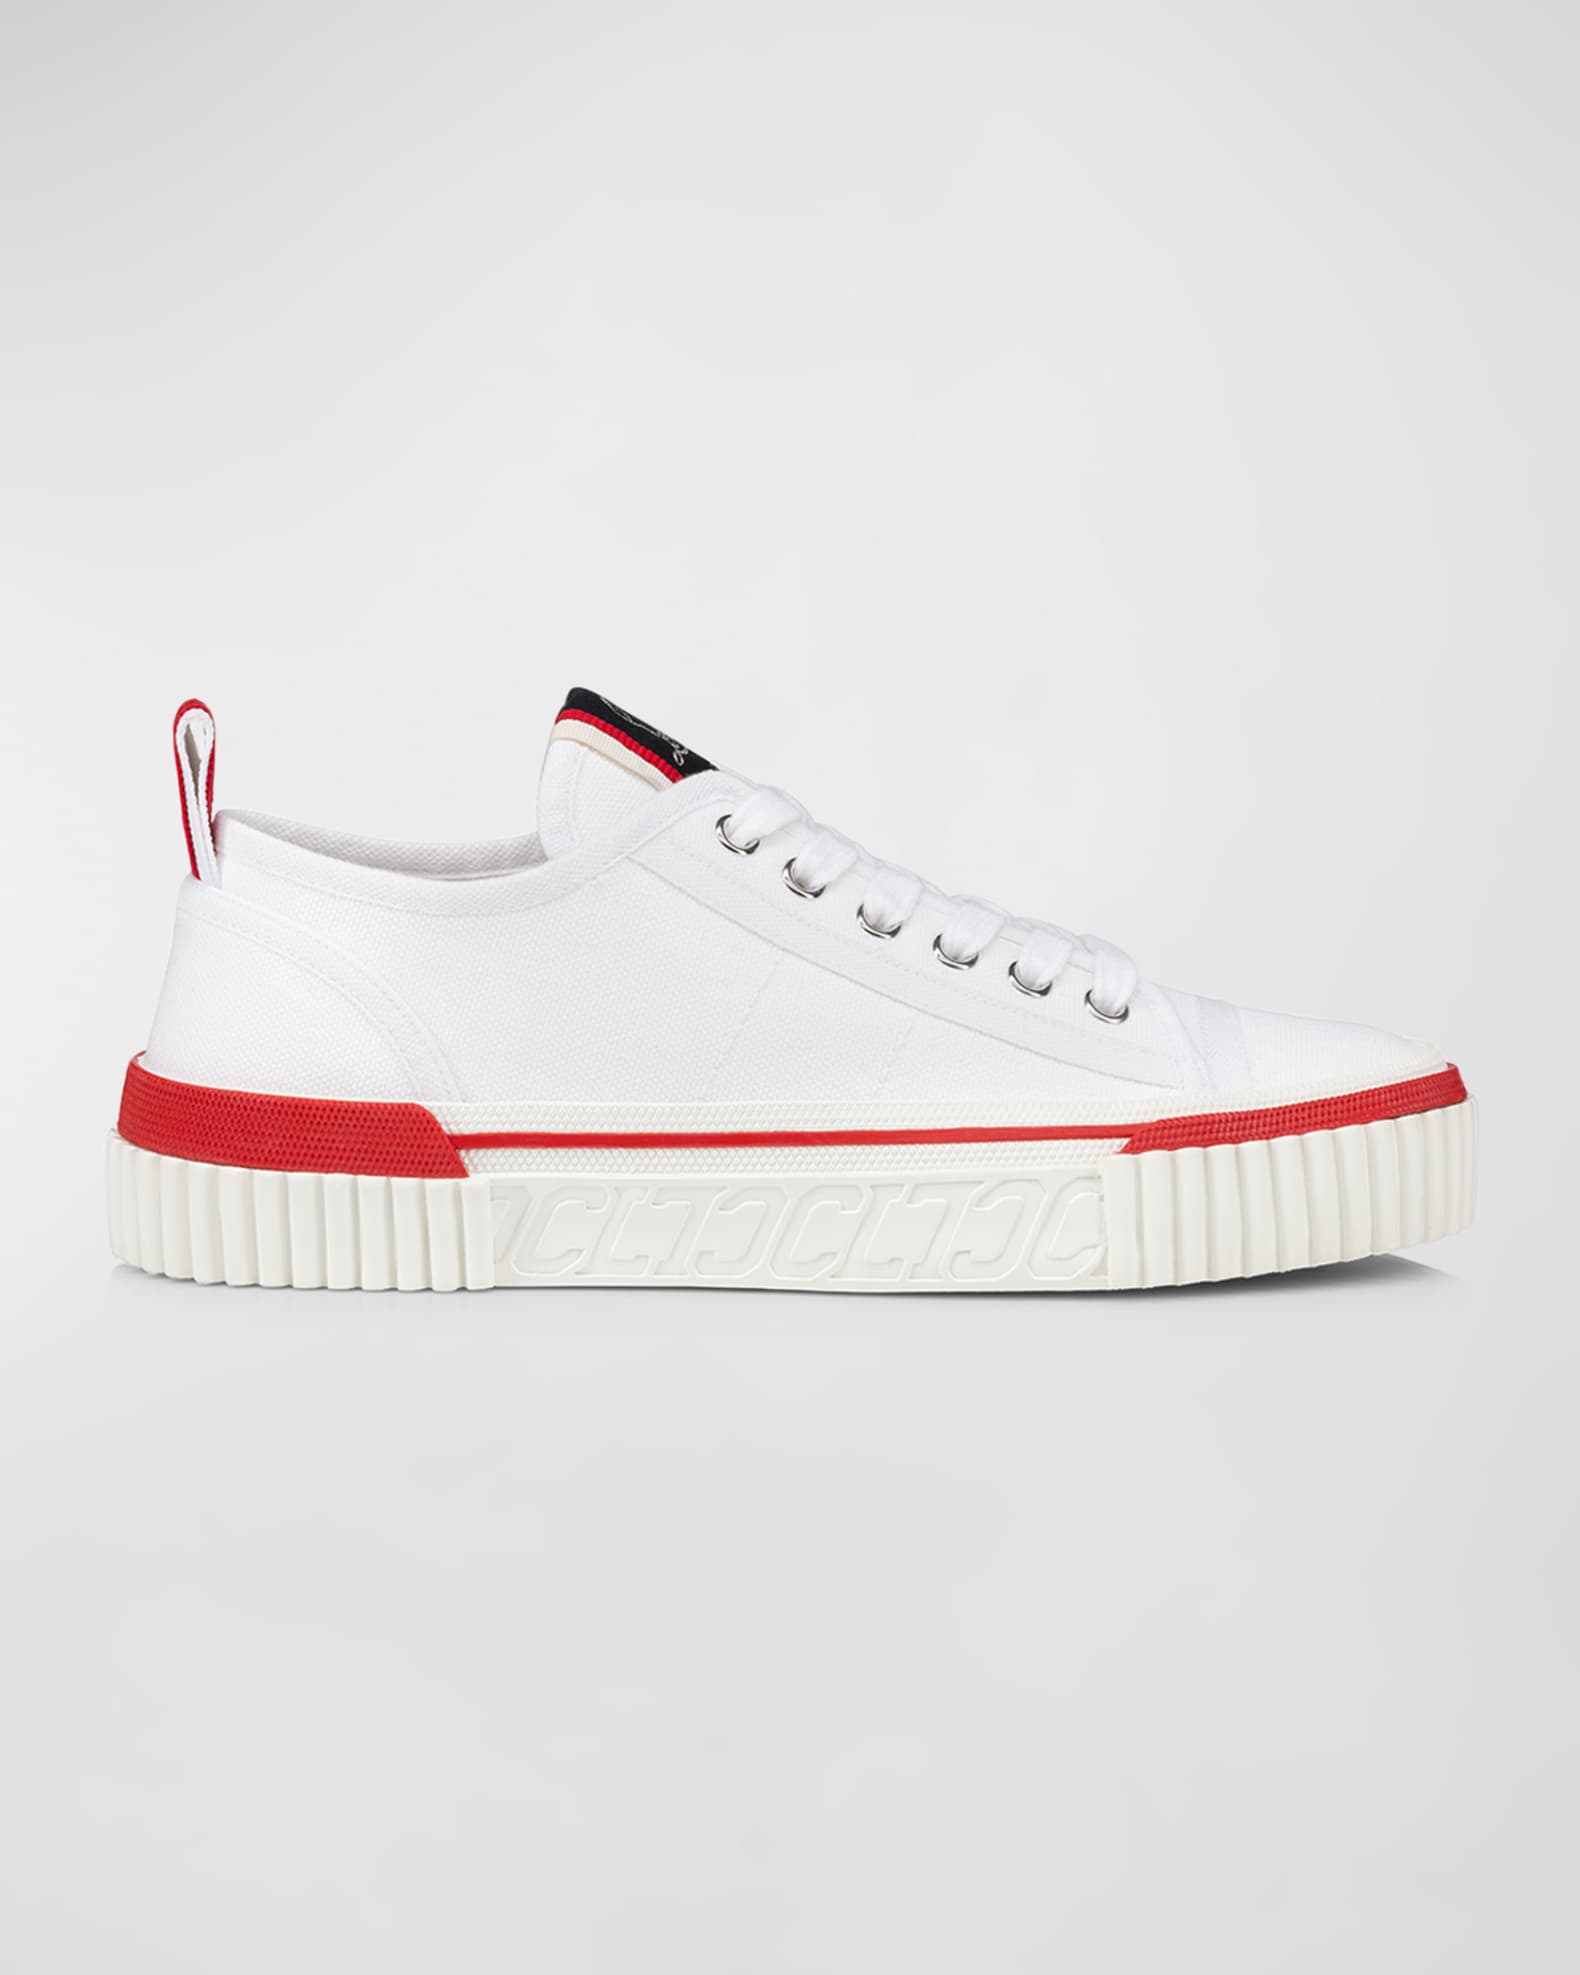 Christian Louboutin Donna Glitter High Top Trainers